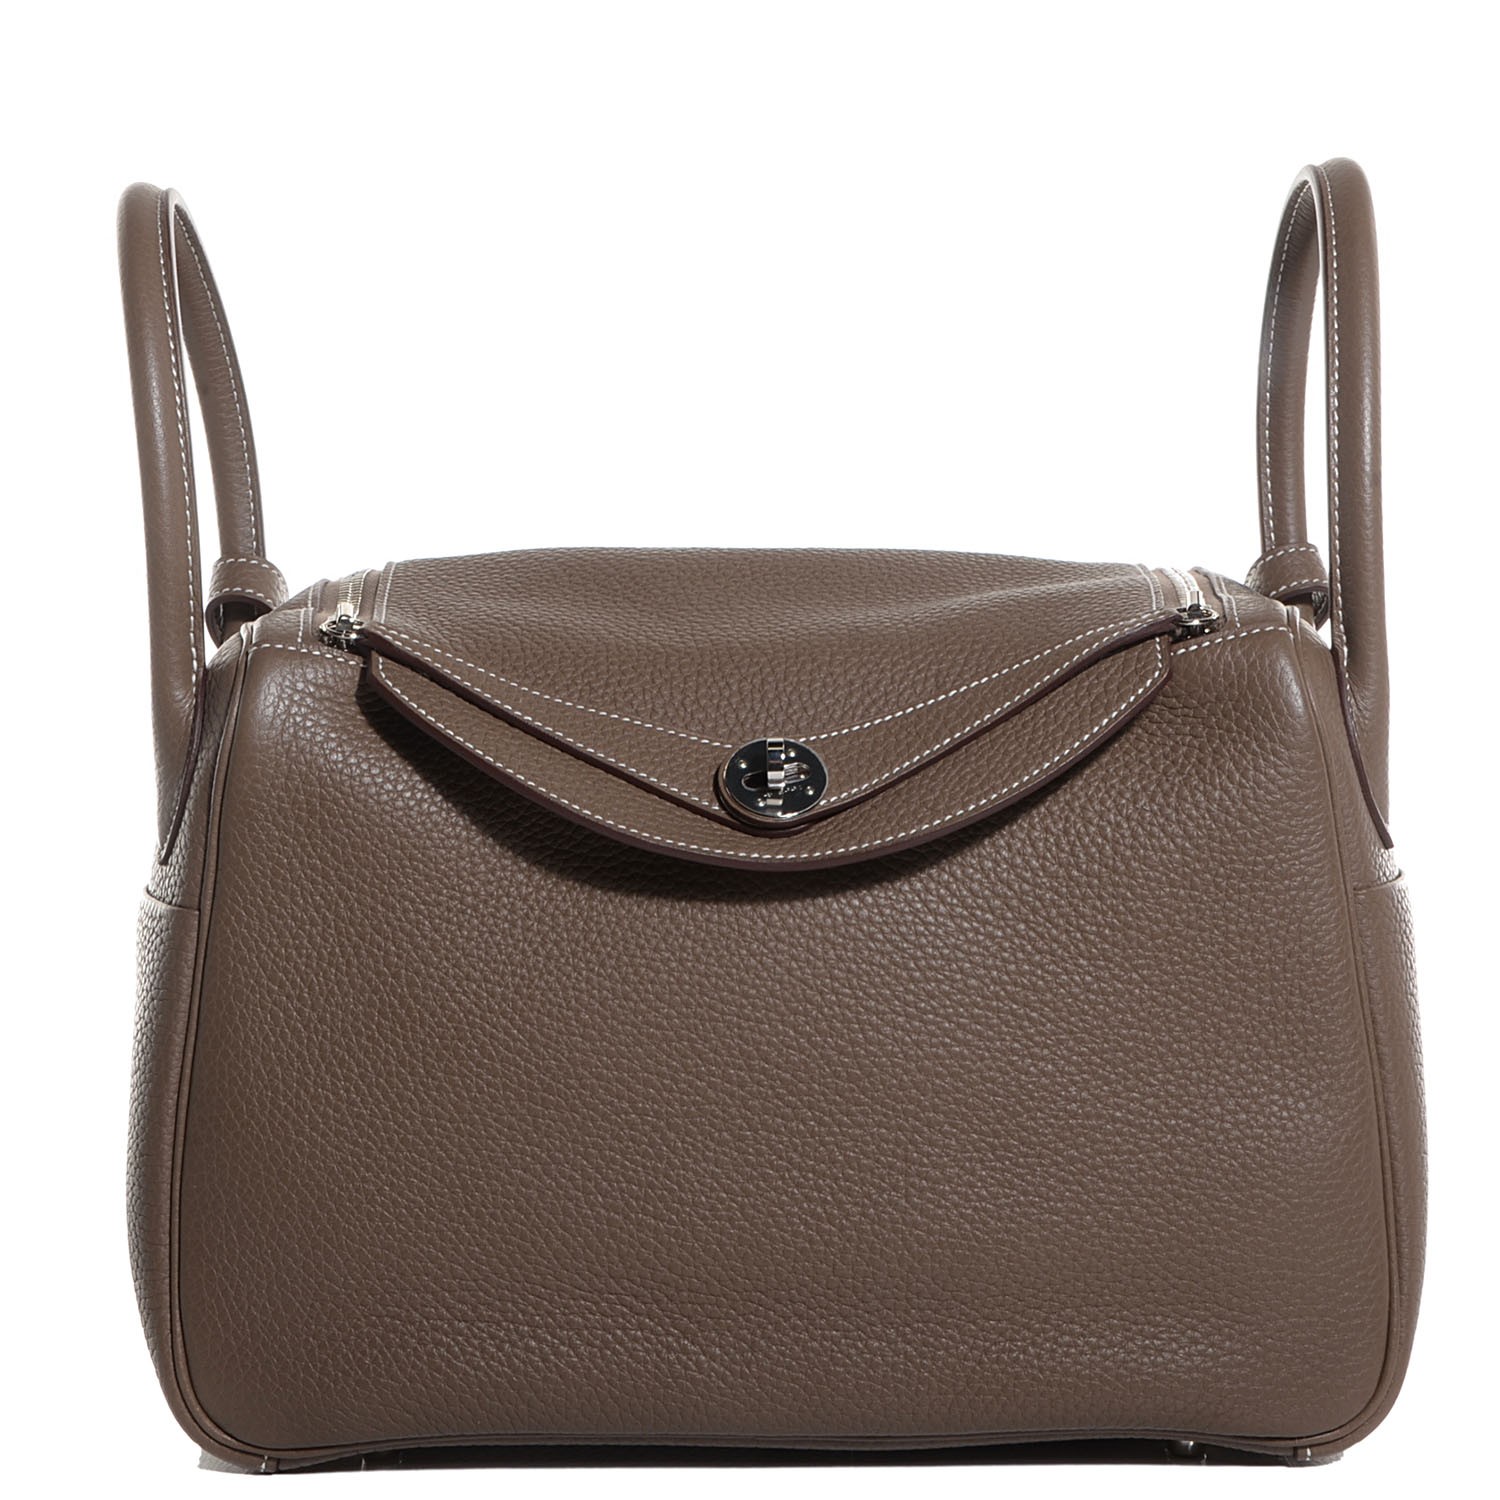 HERMES Taurillon Clemence Lindy 30 